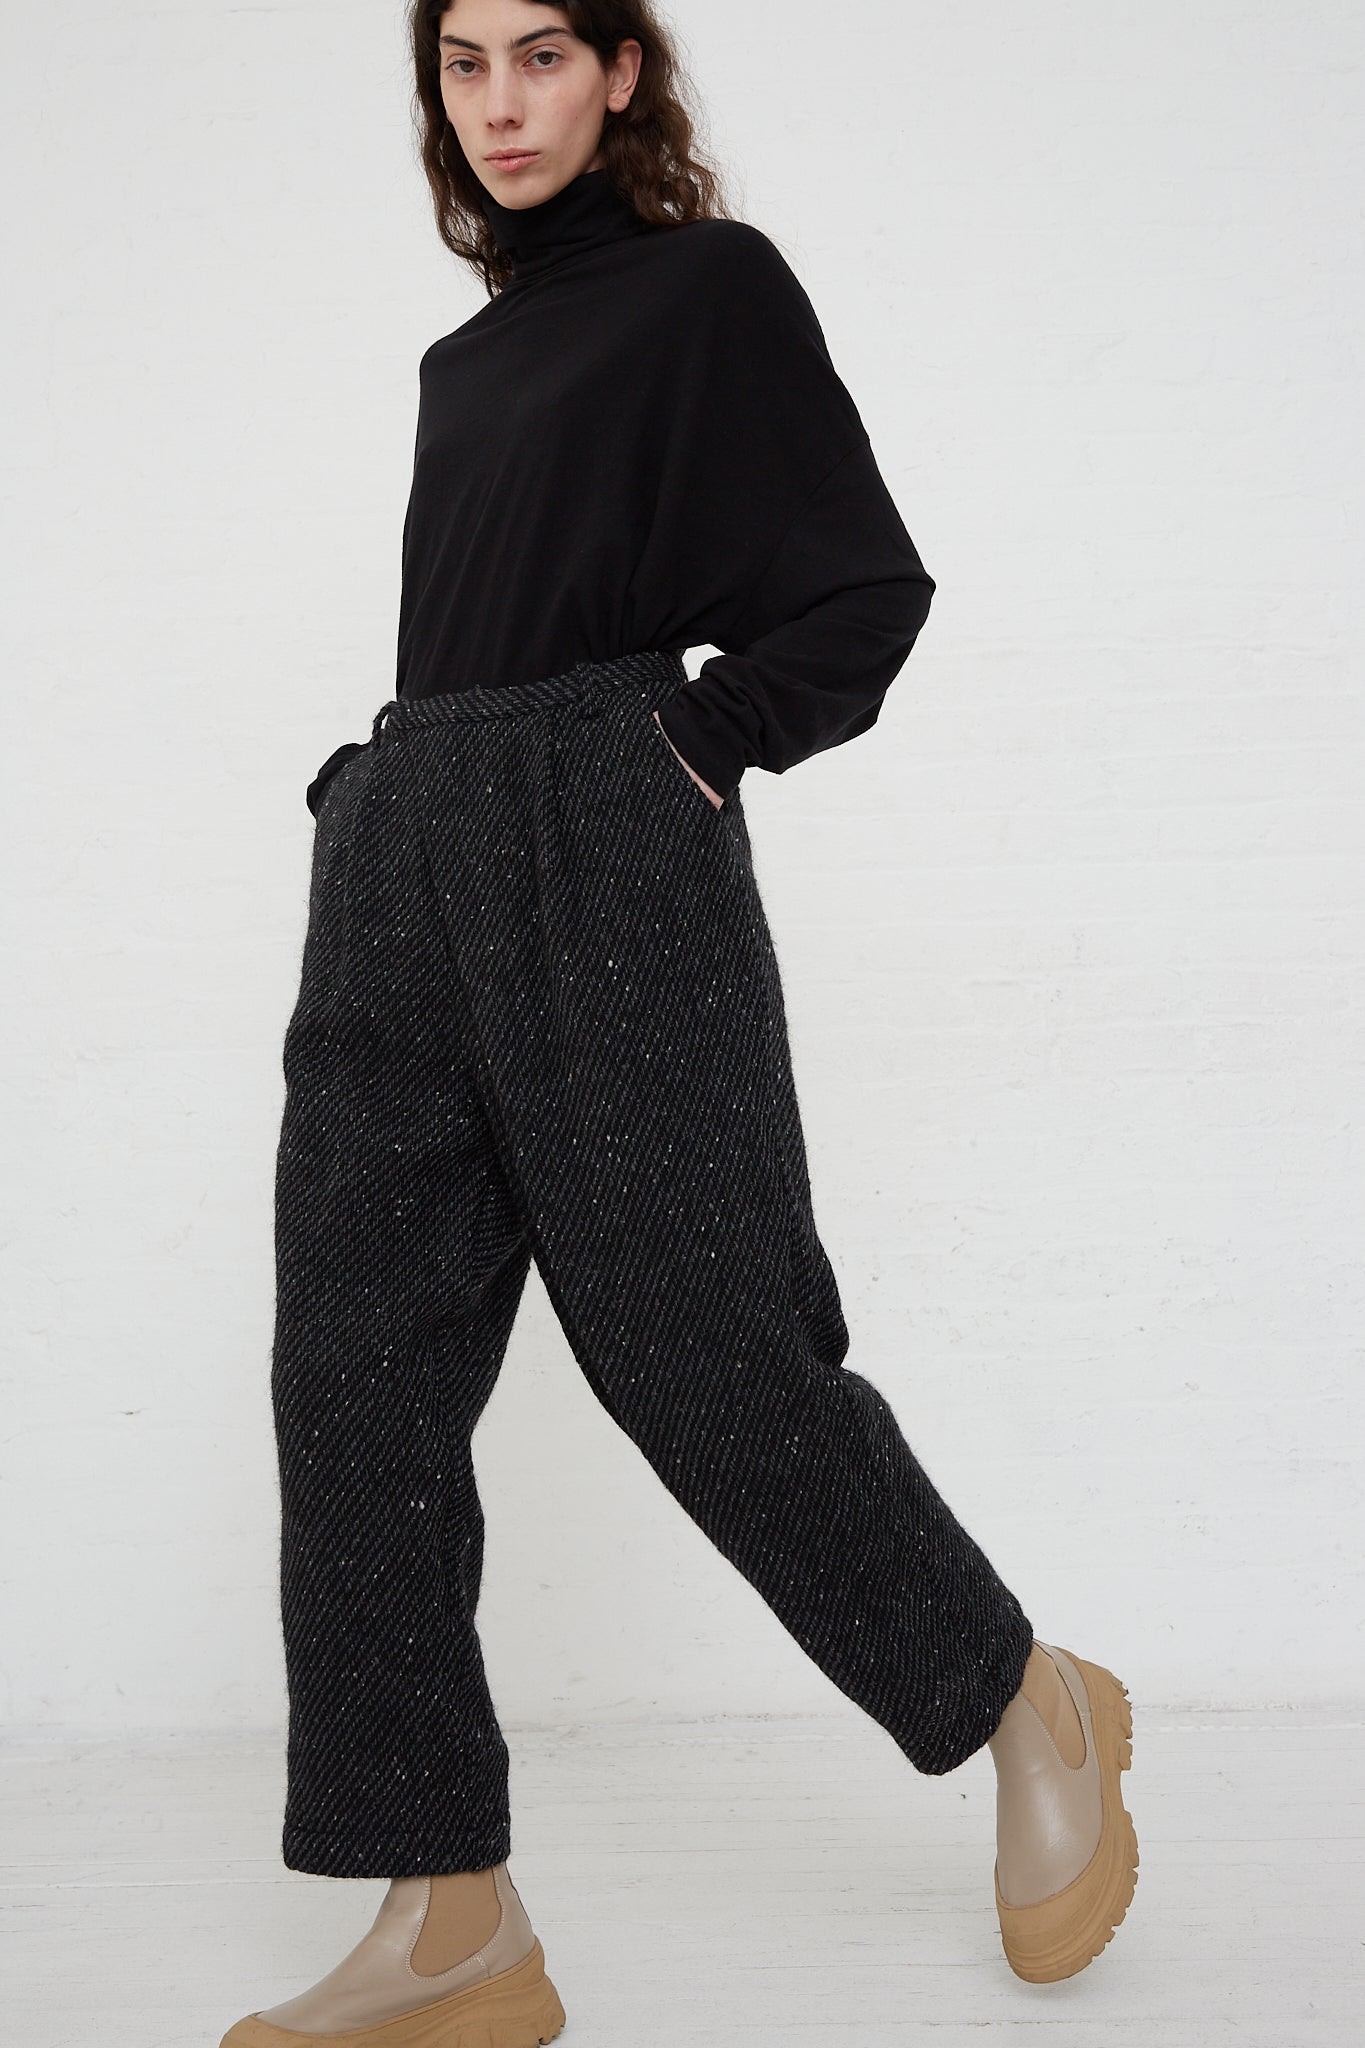 The model is wearing Ichi Antiquités Snow Nep Wool Pant in Black and a black turtleneck.